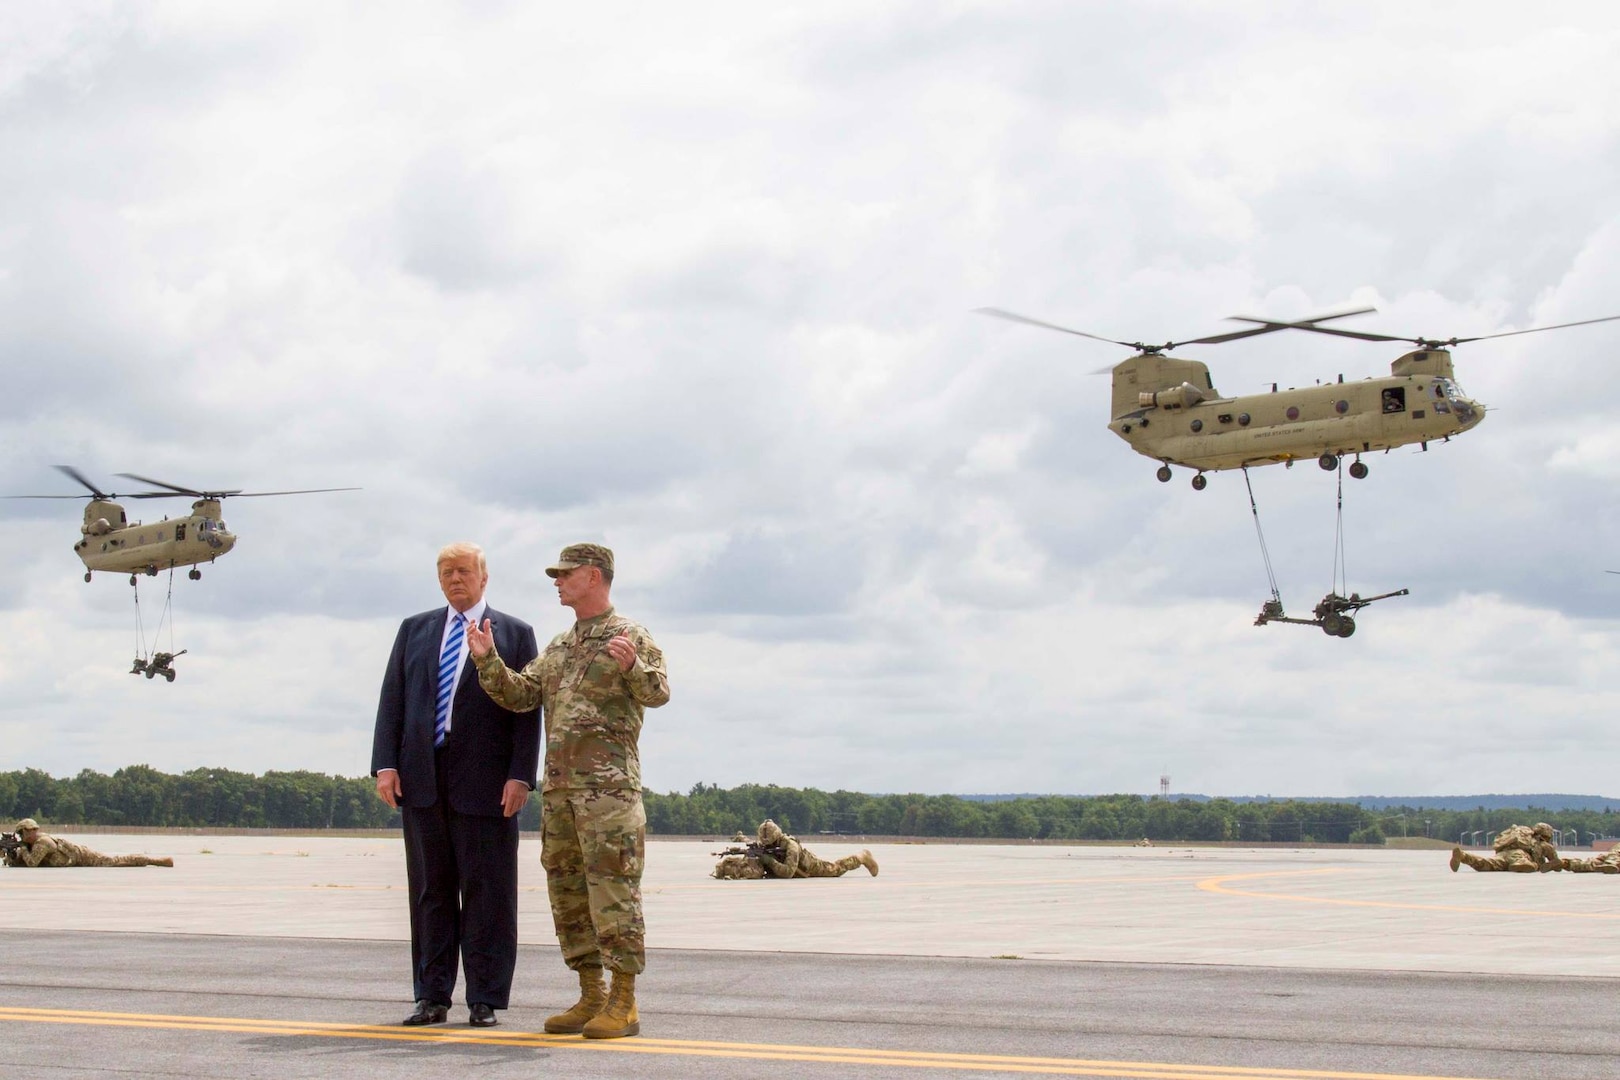 President Donald Trump watches a demonstration of the 10th Mountain Division's capabilities with Maj. Gen. Walter Piatt during a visit to Fort Drum, New York, Aug. 13, 2018.